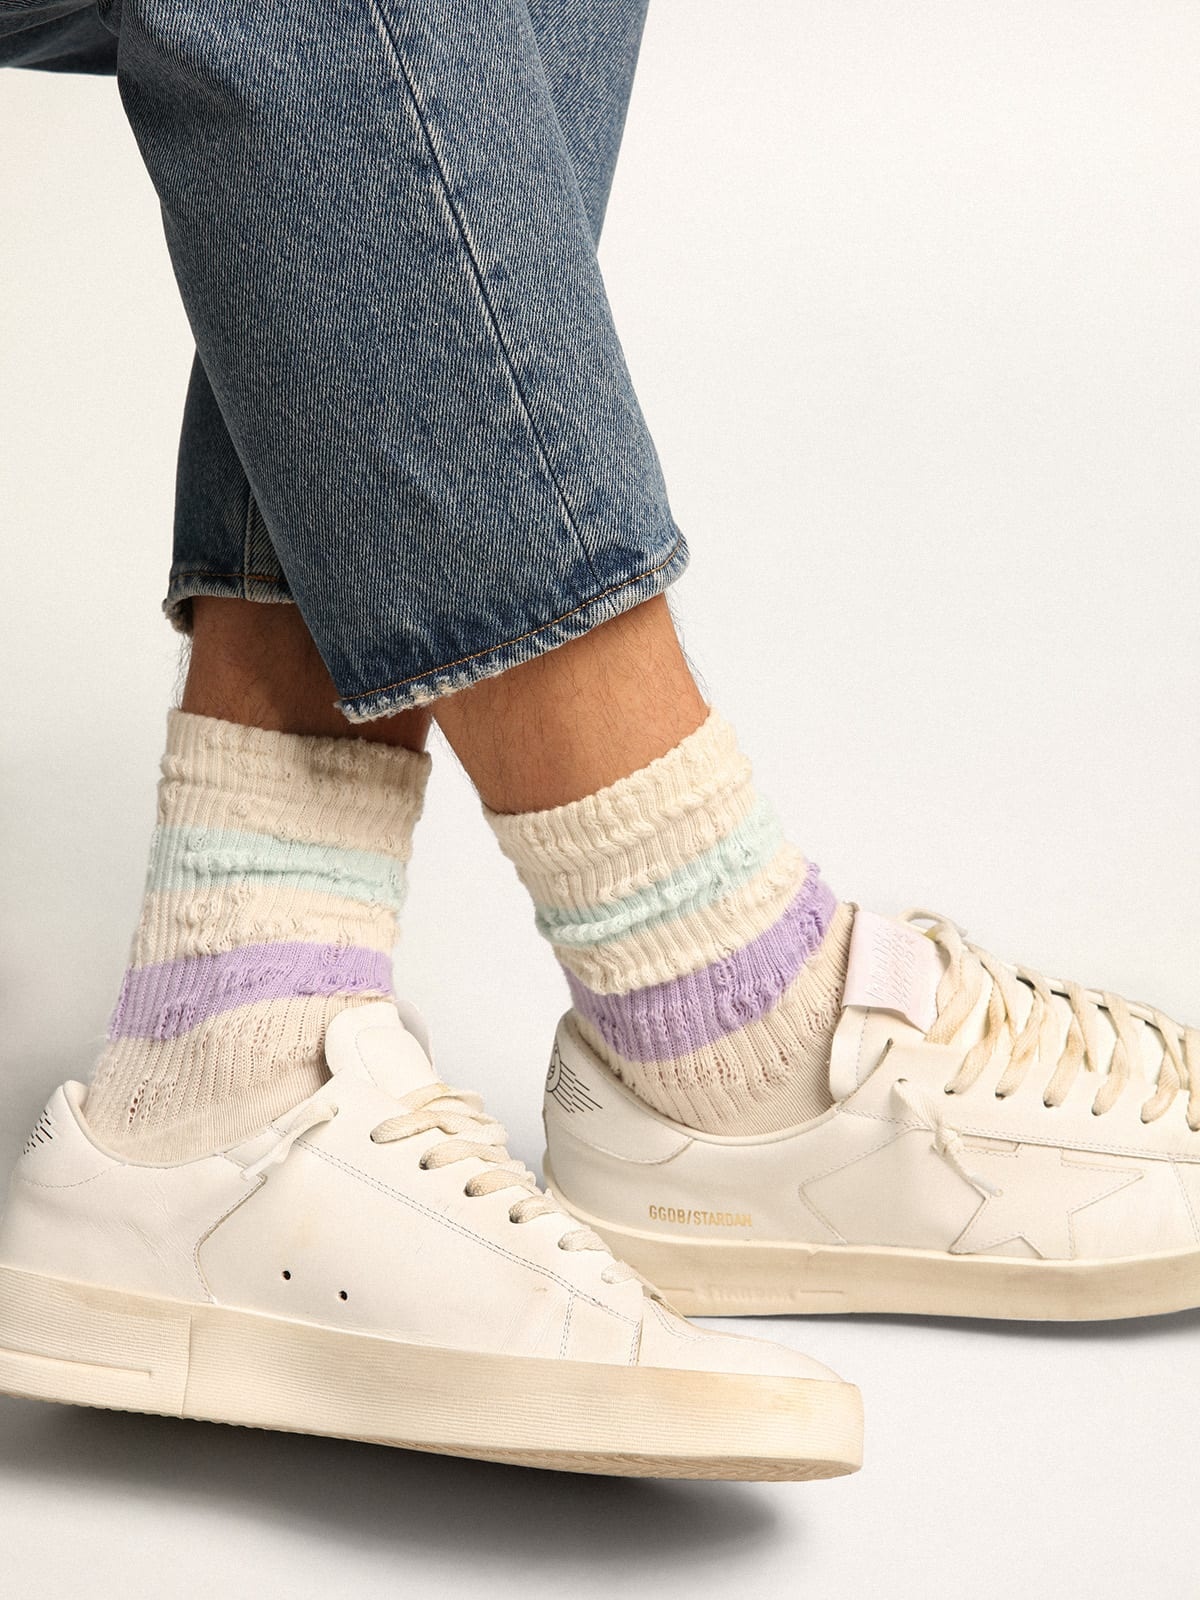 Distressed-finish white socks with lilac and baby blue stripes - 4